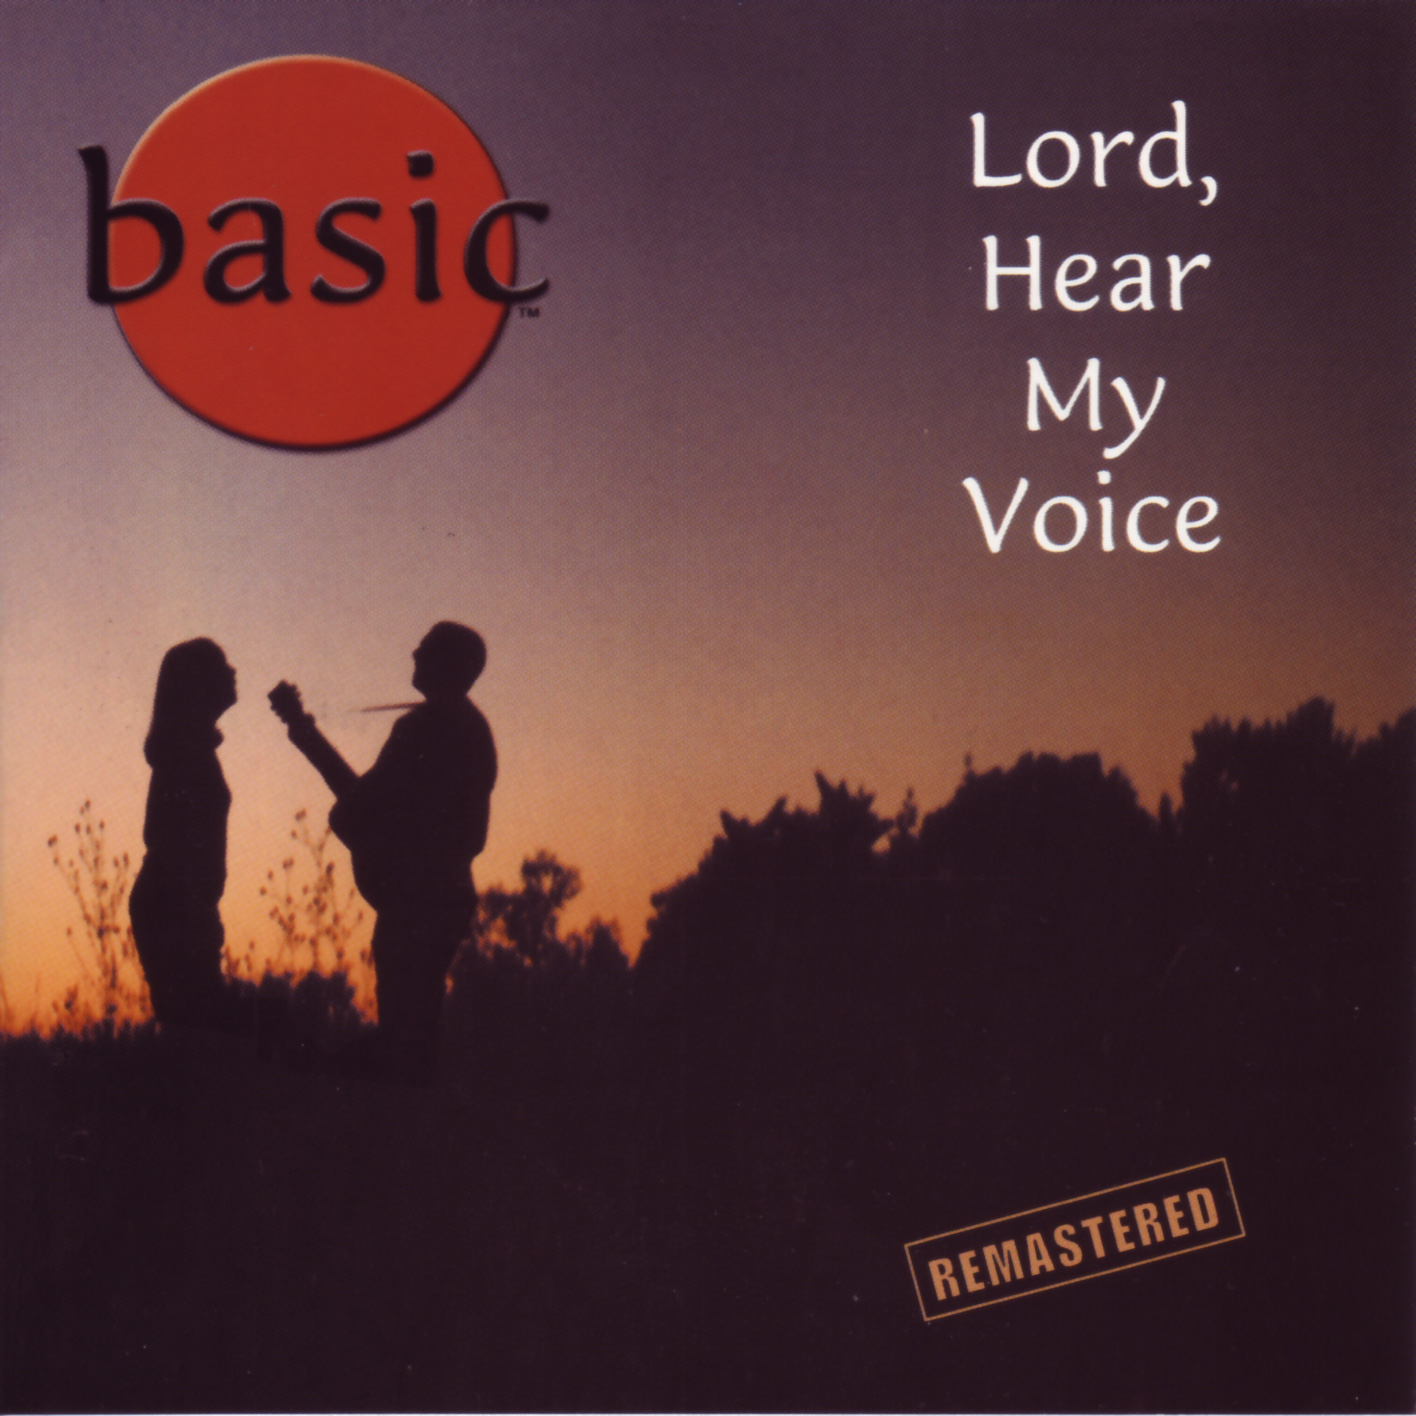 Lord, Hear My Voice by basic